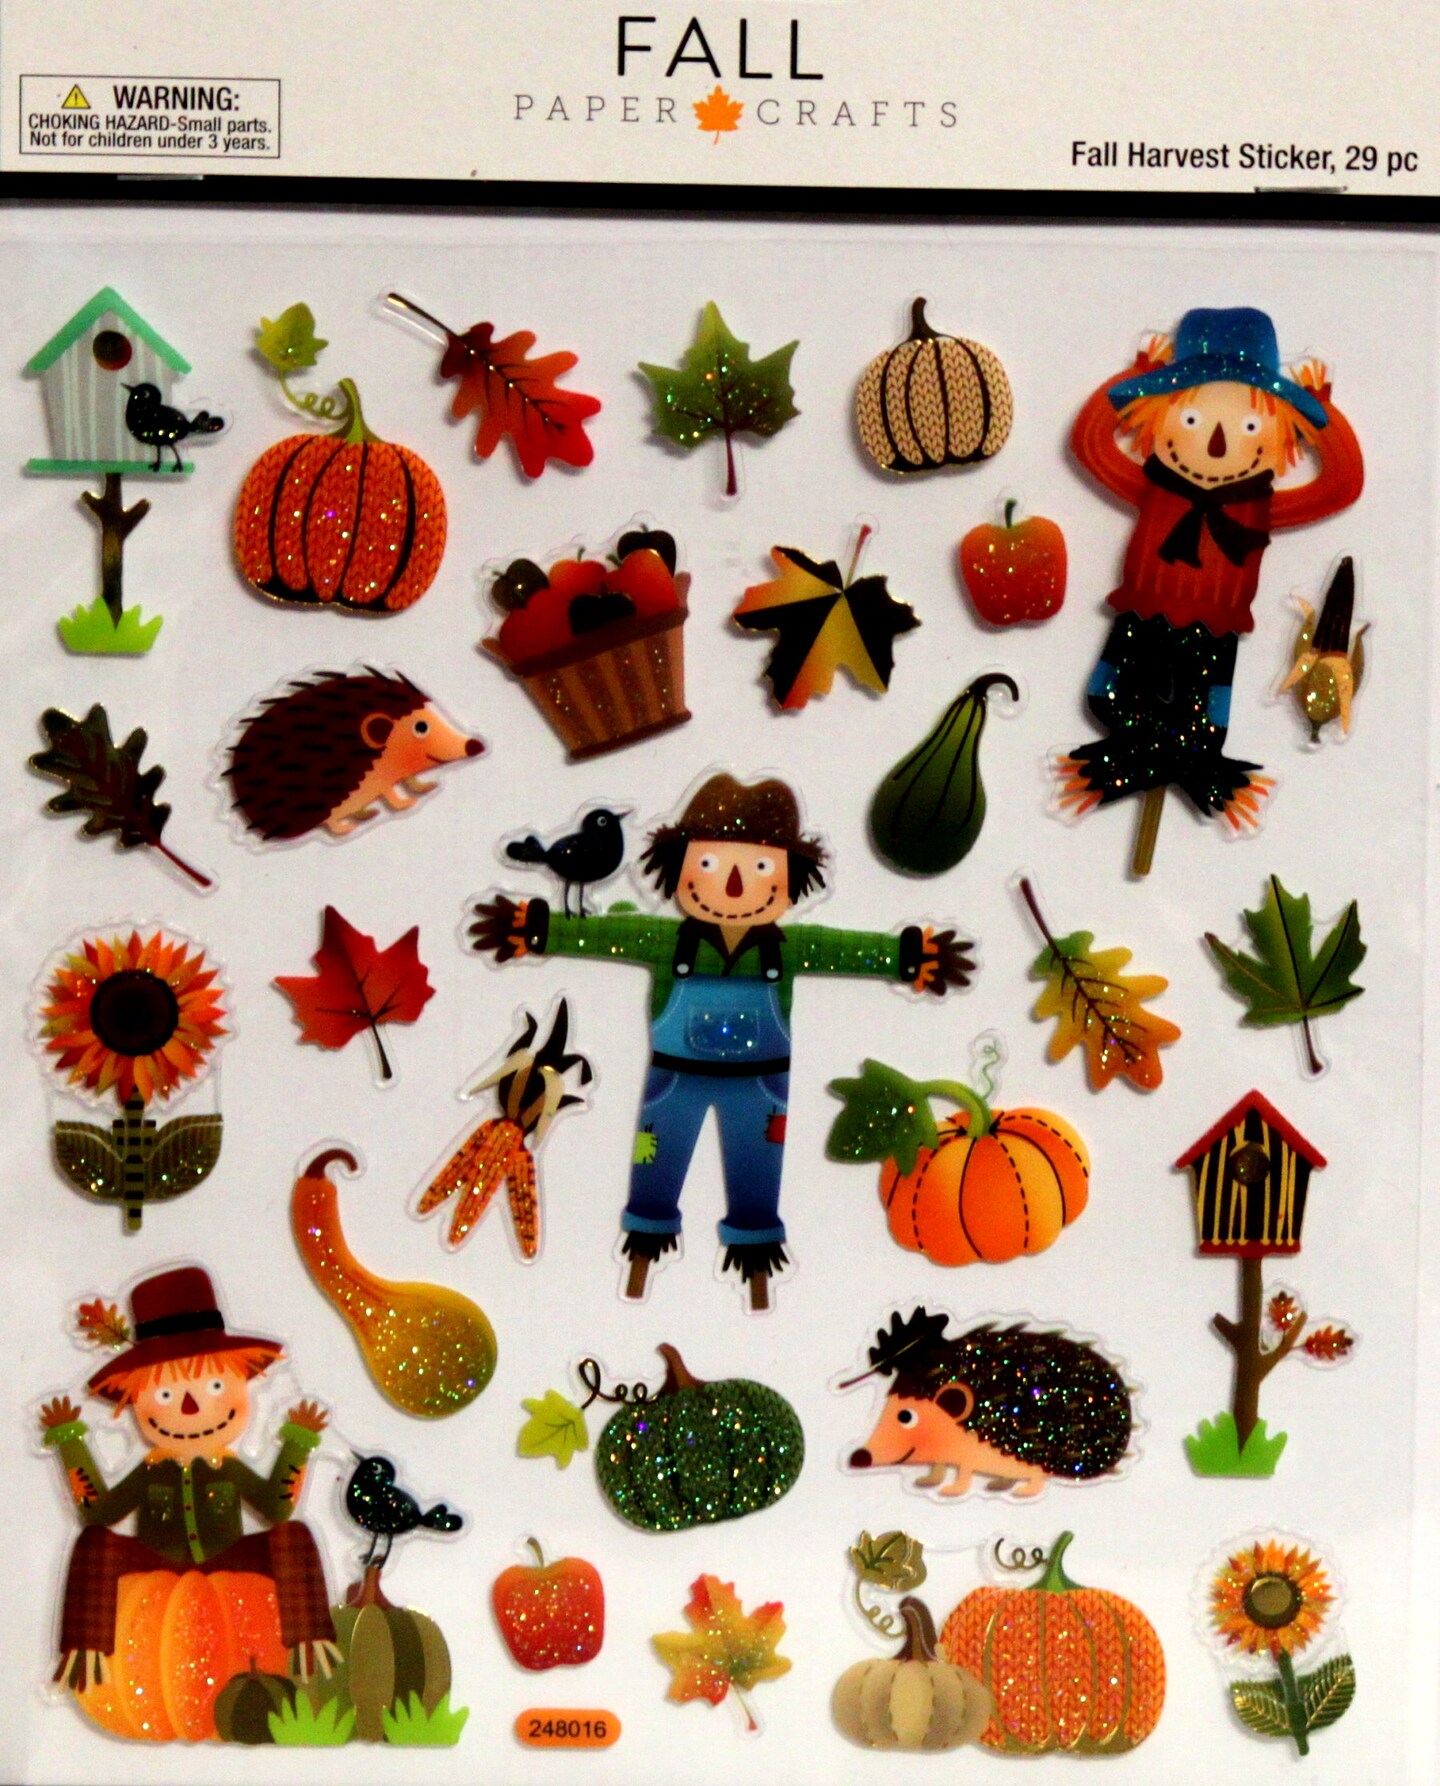 Fall Paper Crafts Fall Harvest Clear Glitter Stickers